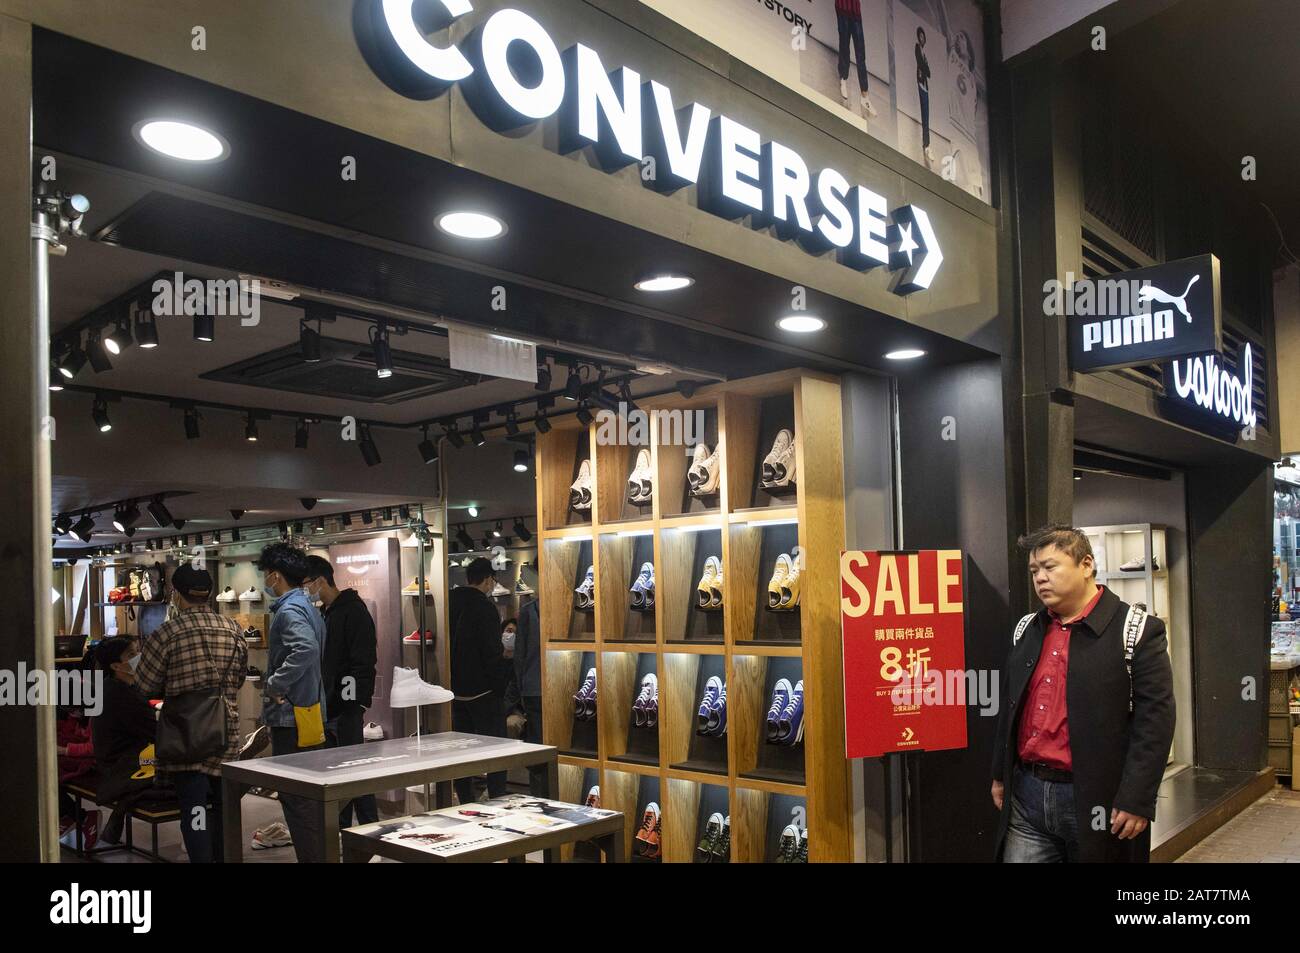 where is the converse store